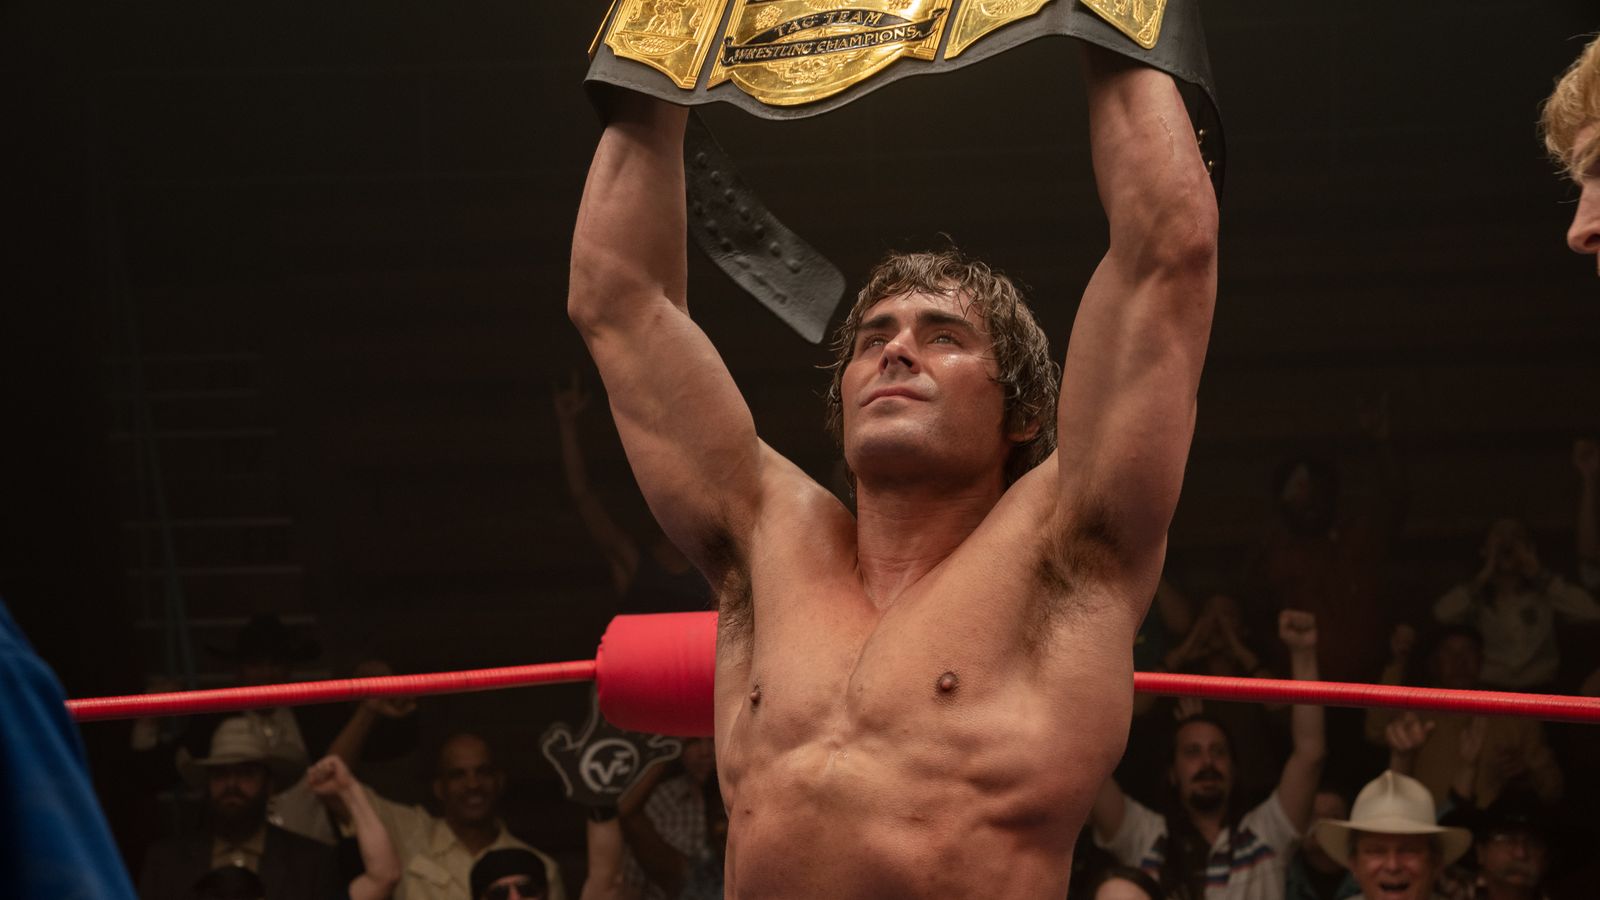 Toxic masculinity and wrestling: Zac Efron on his role in The Iron Claw | Ents & Arts News